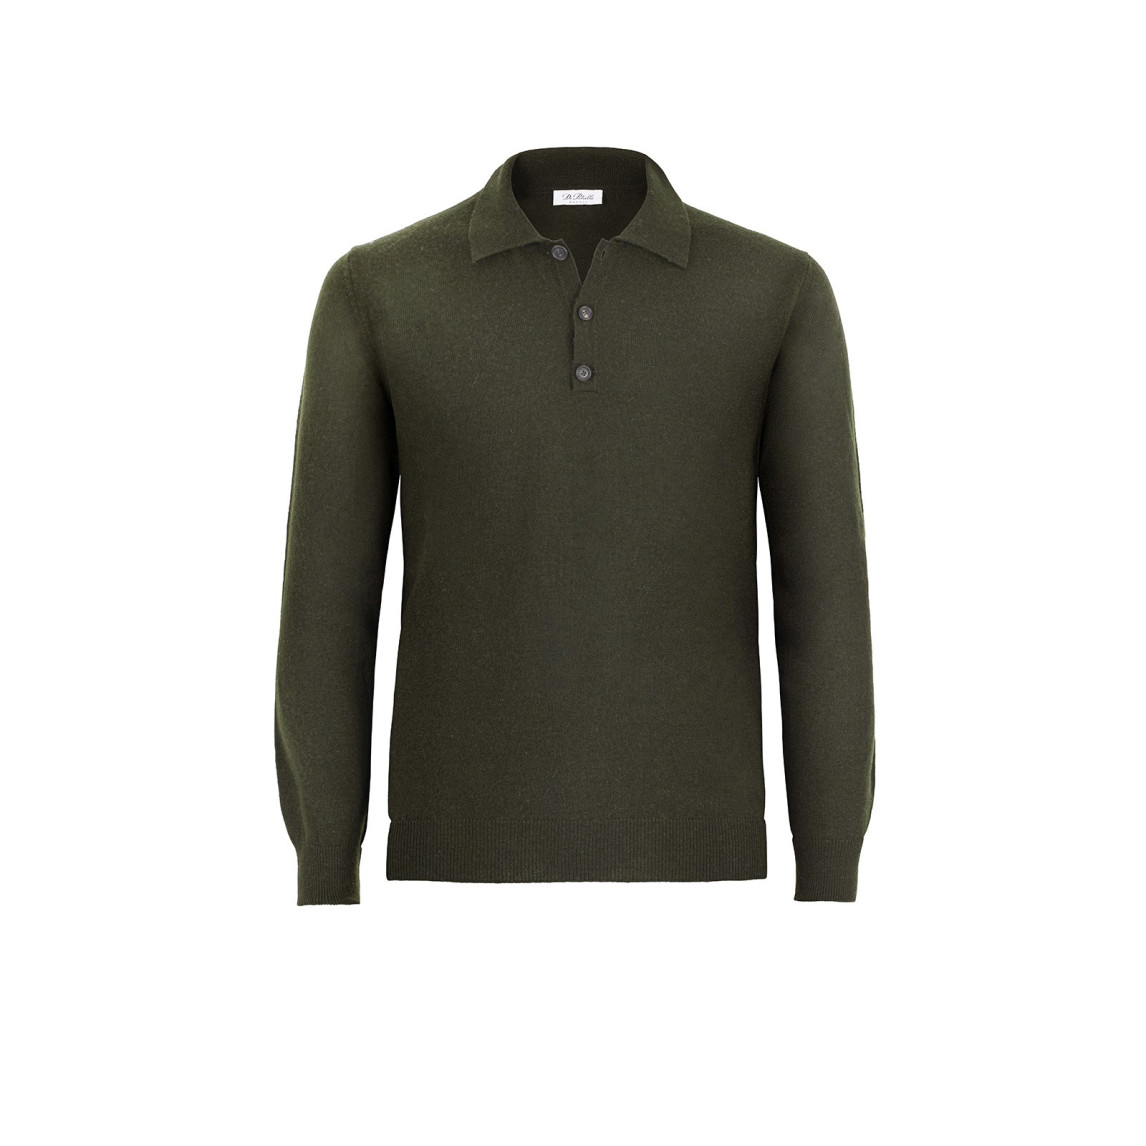 Olive Cashmere, Wool And Silk Knit Polo Shirt